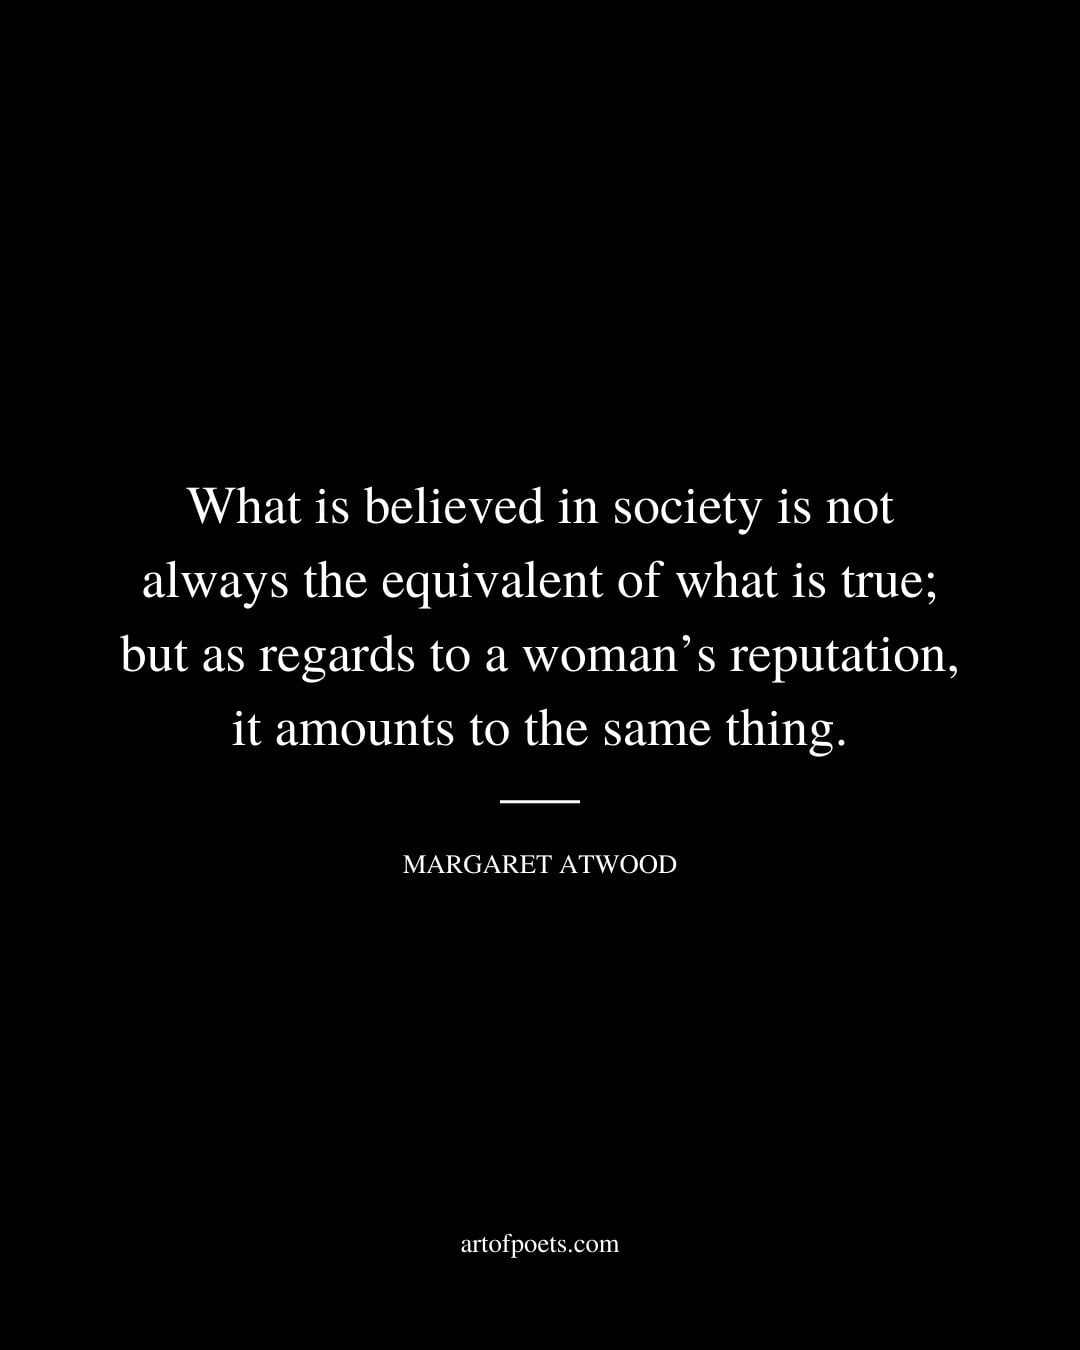 What is believed in society is not always the equivalent of what is true but as regards to a womans reputation it amounts to the same thing